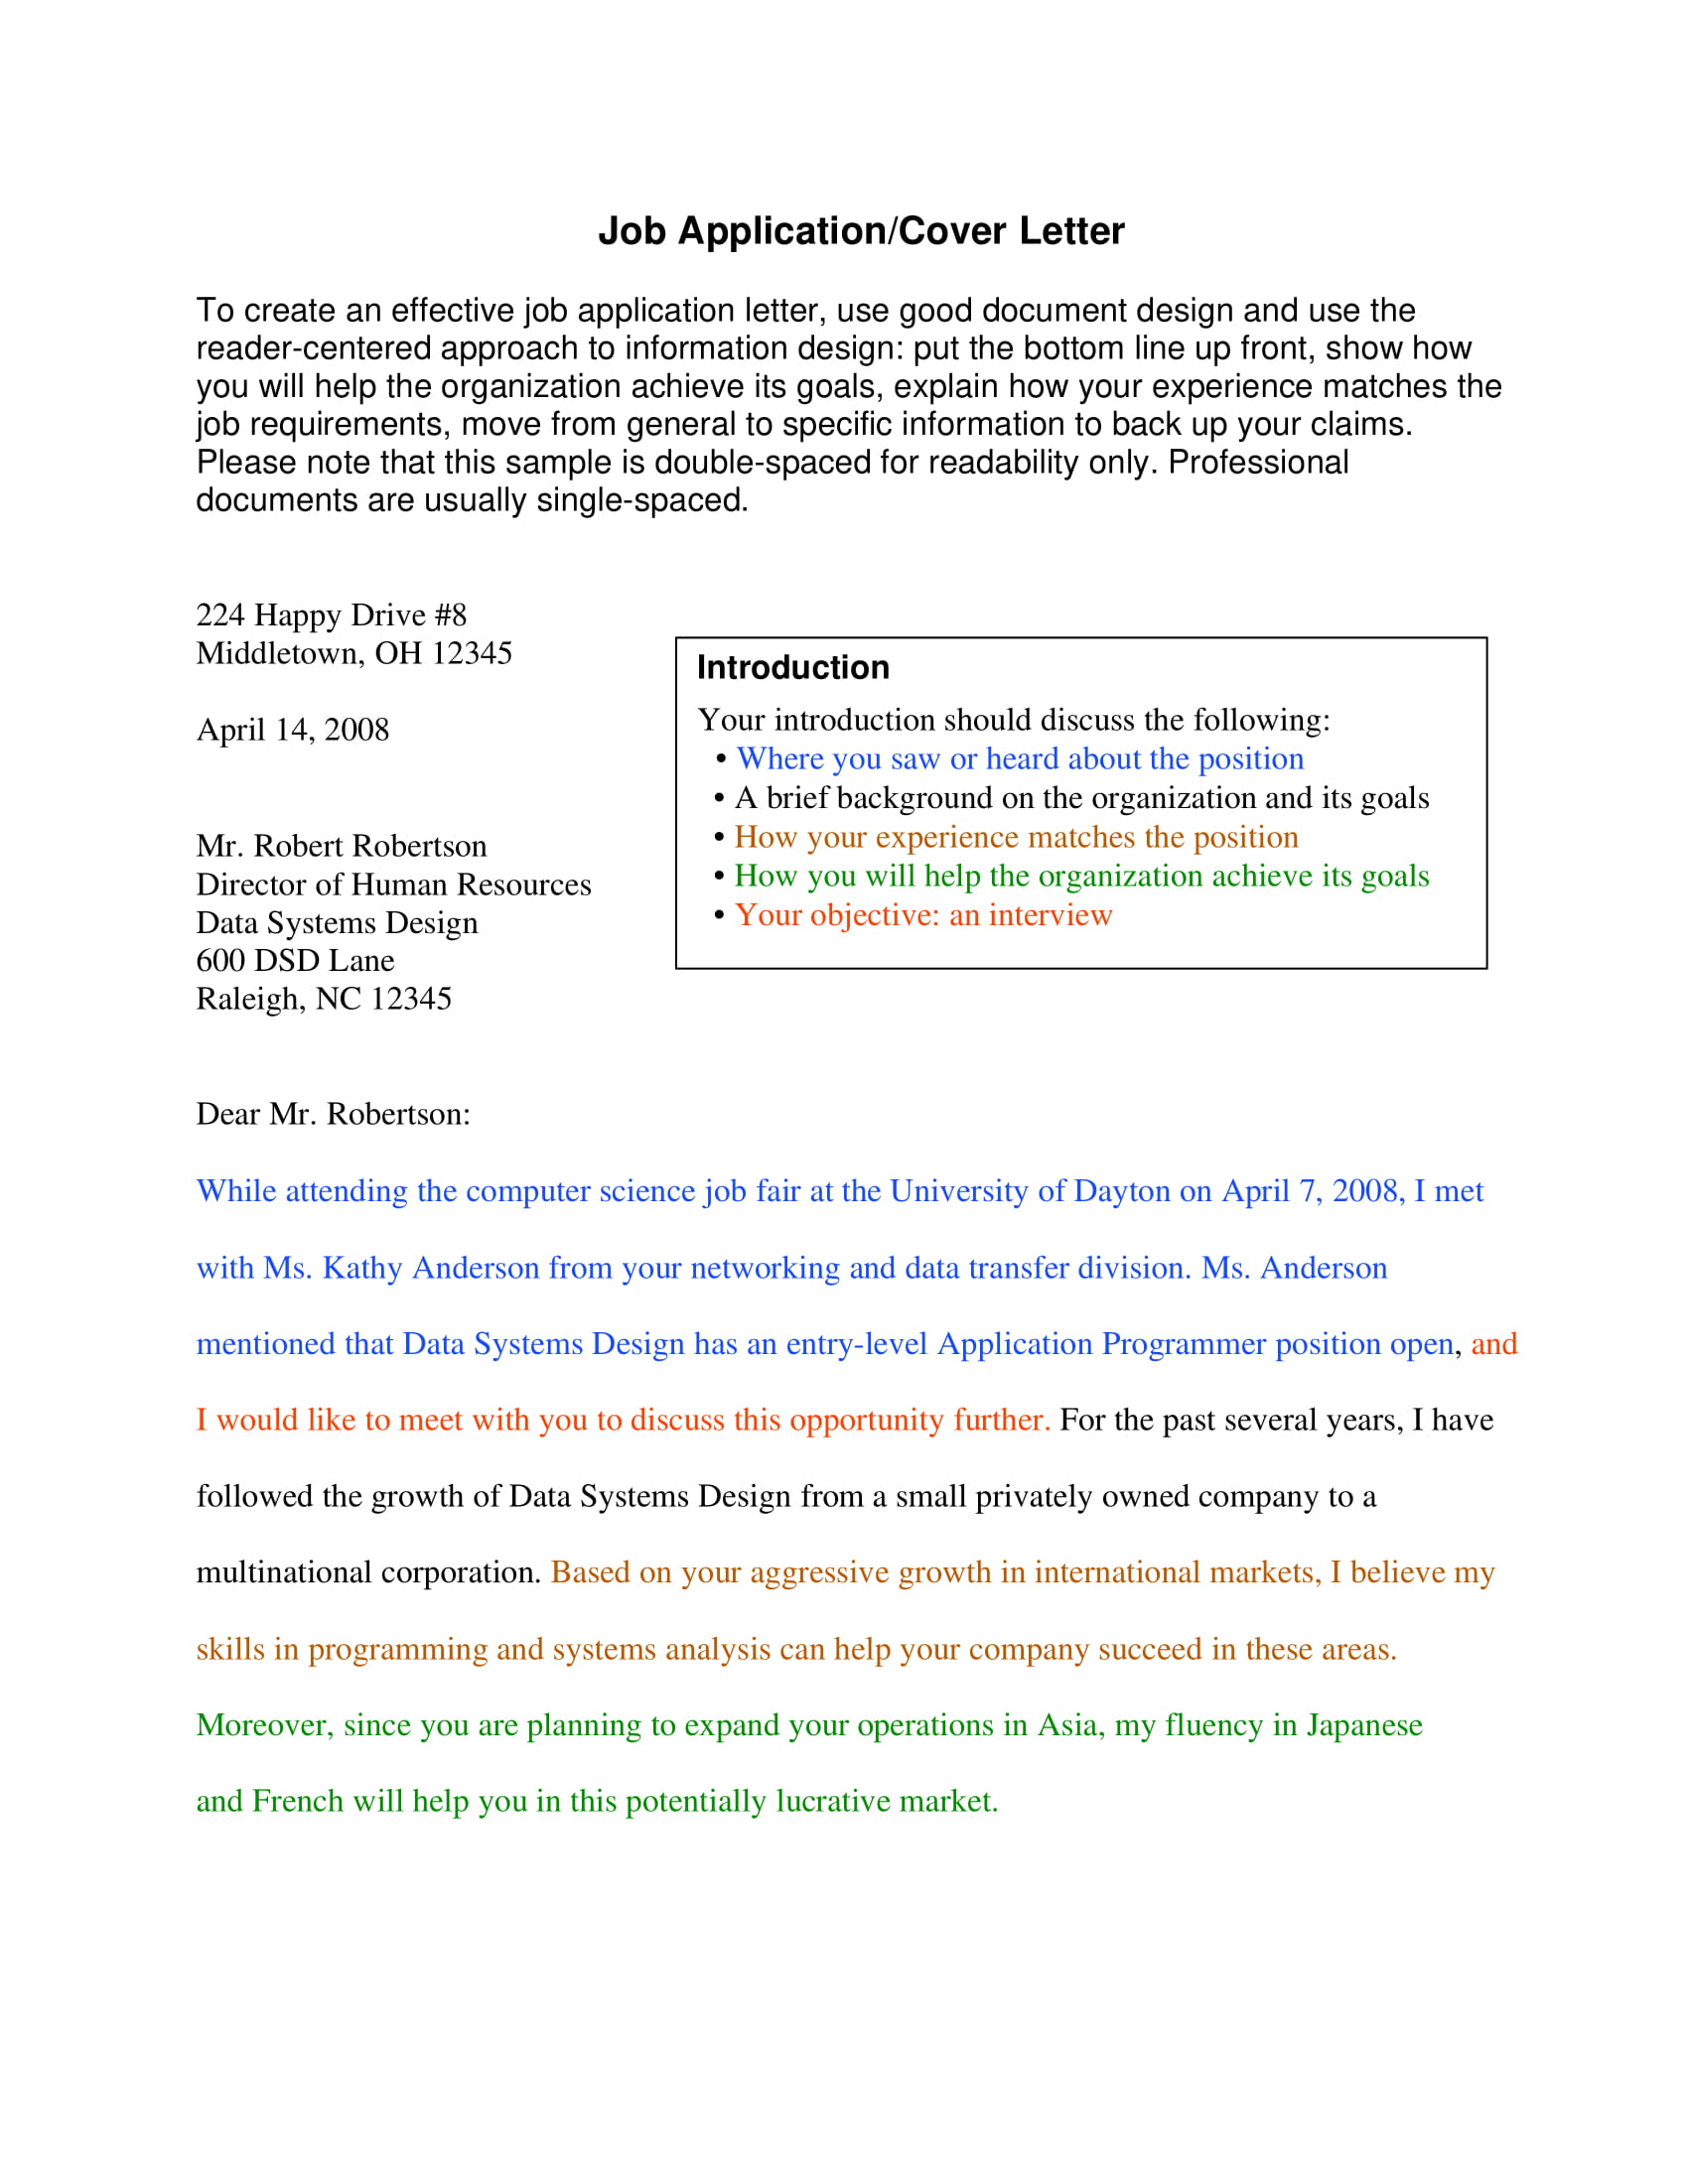 10+ Professional Cover Letter Examples - PDF | Examples